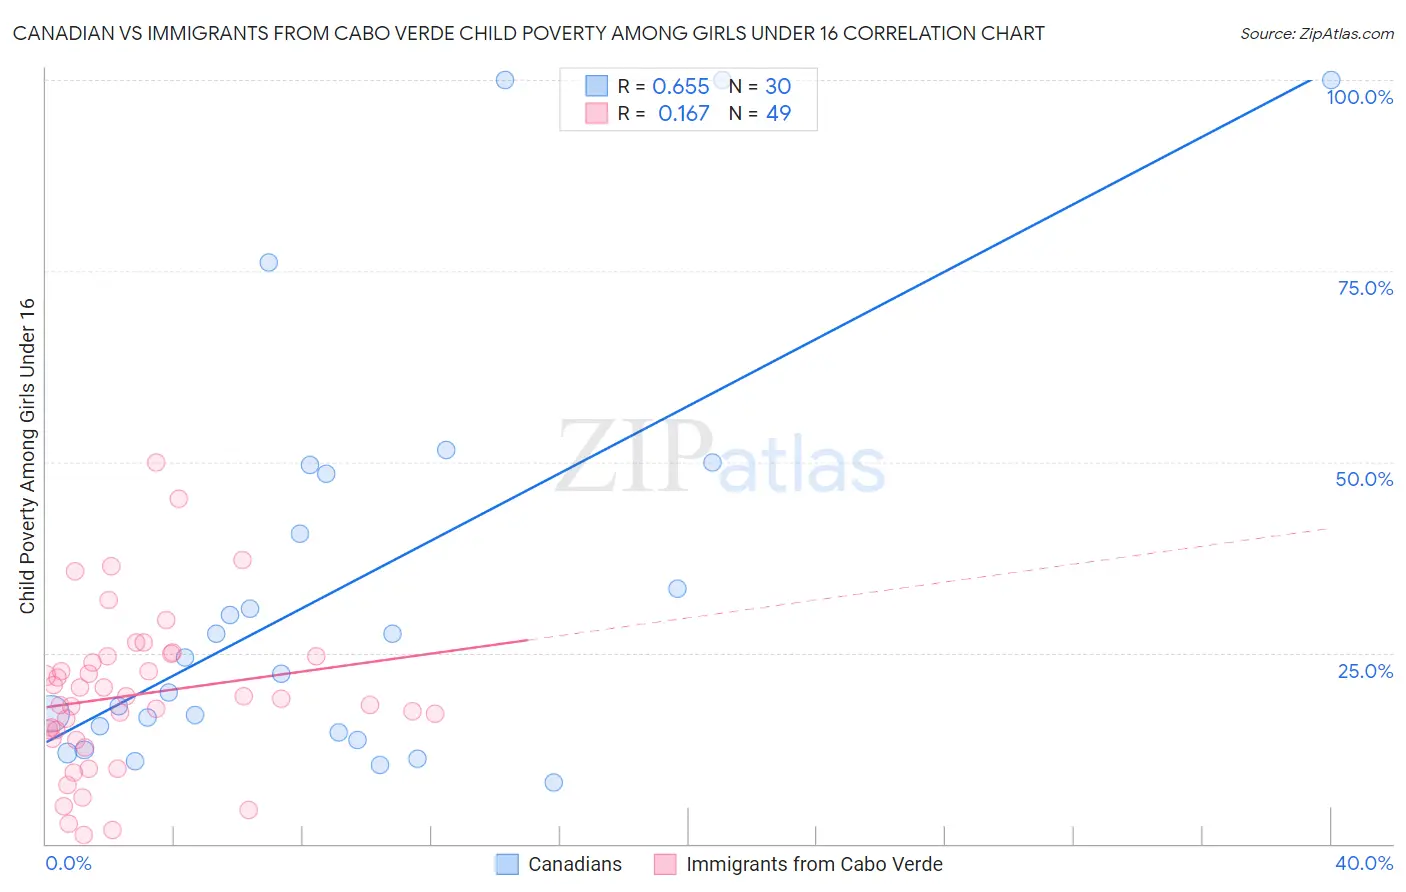 Canadian vs Immigrants from Cabo Verde Child Poverty Among Girls Under 16